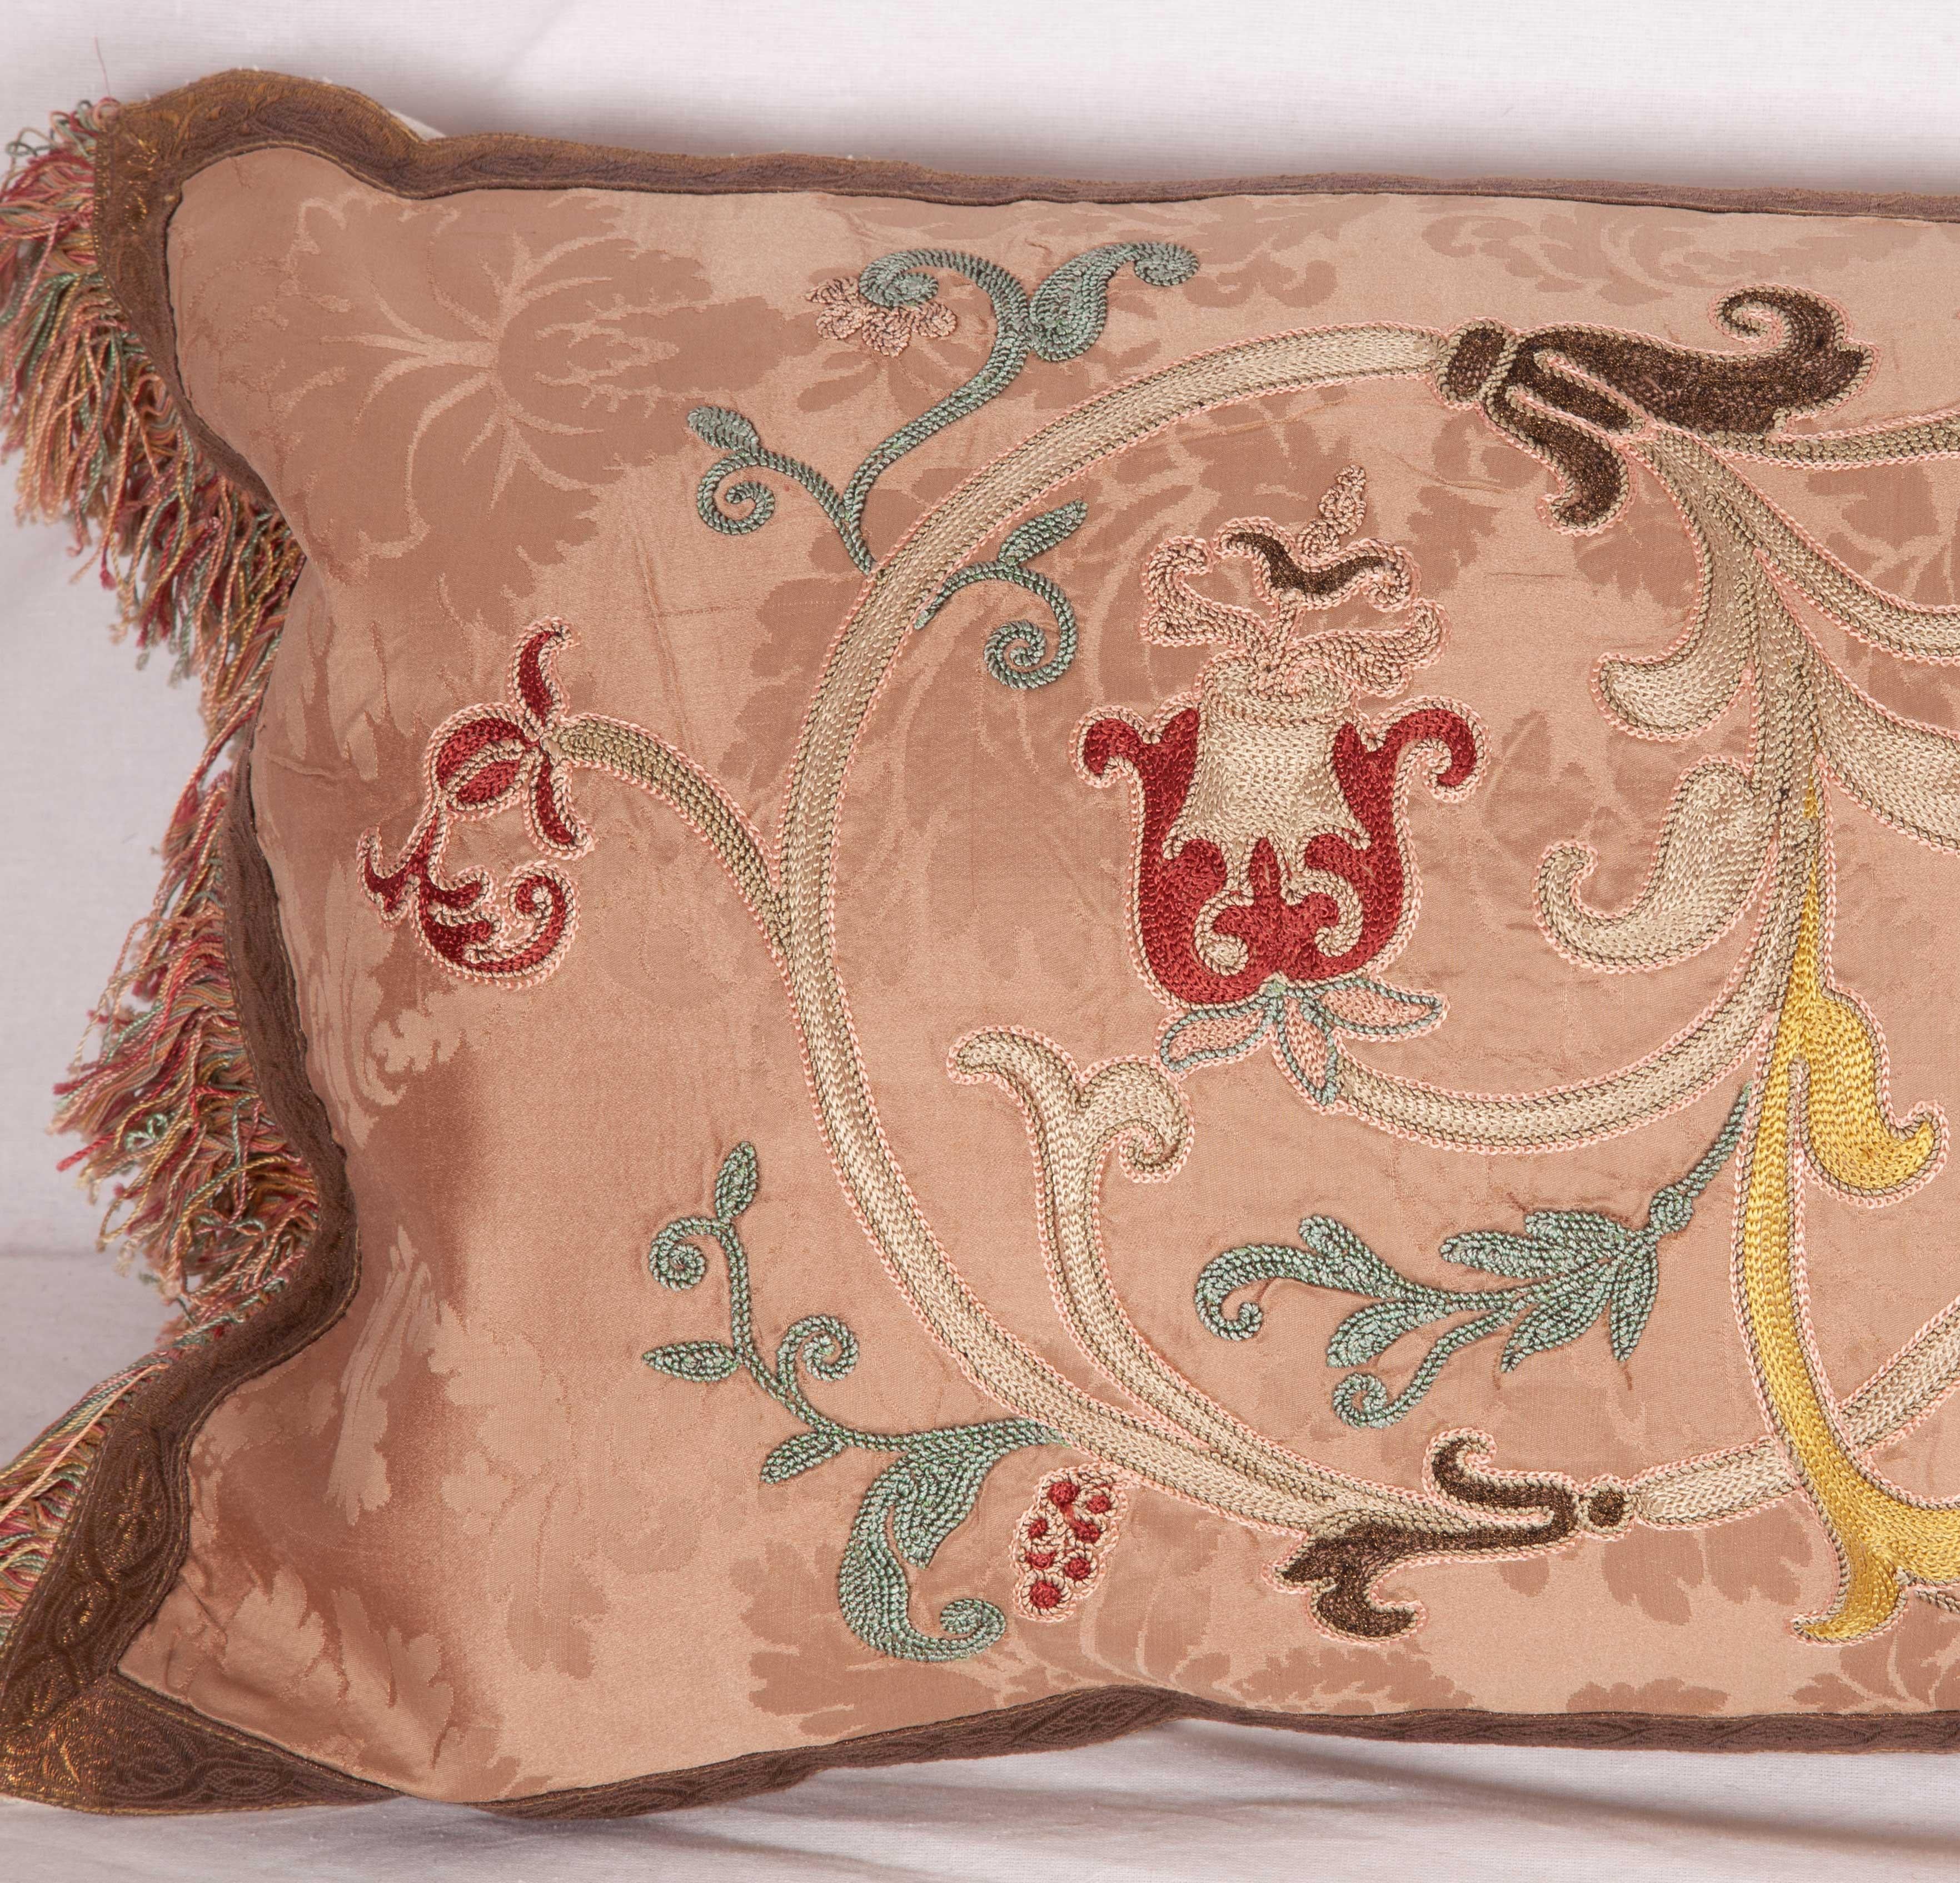 Suzani Long Pillow Case Fashioned from a European Embroidery, Late 19th Century